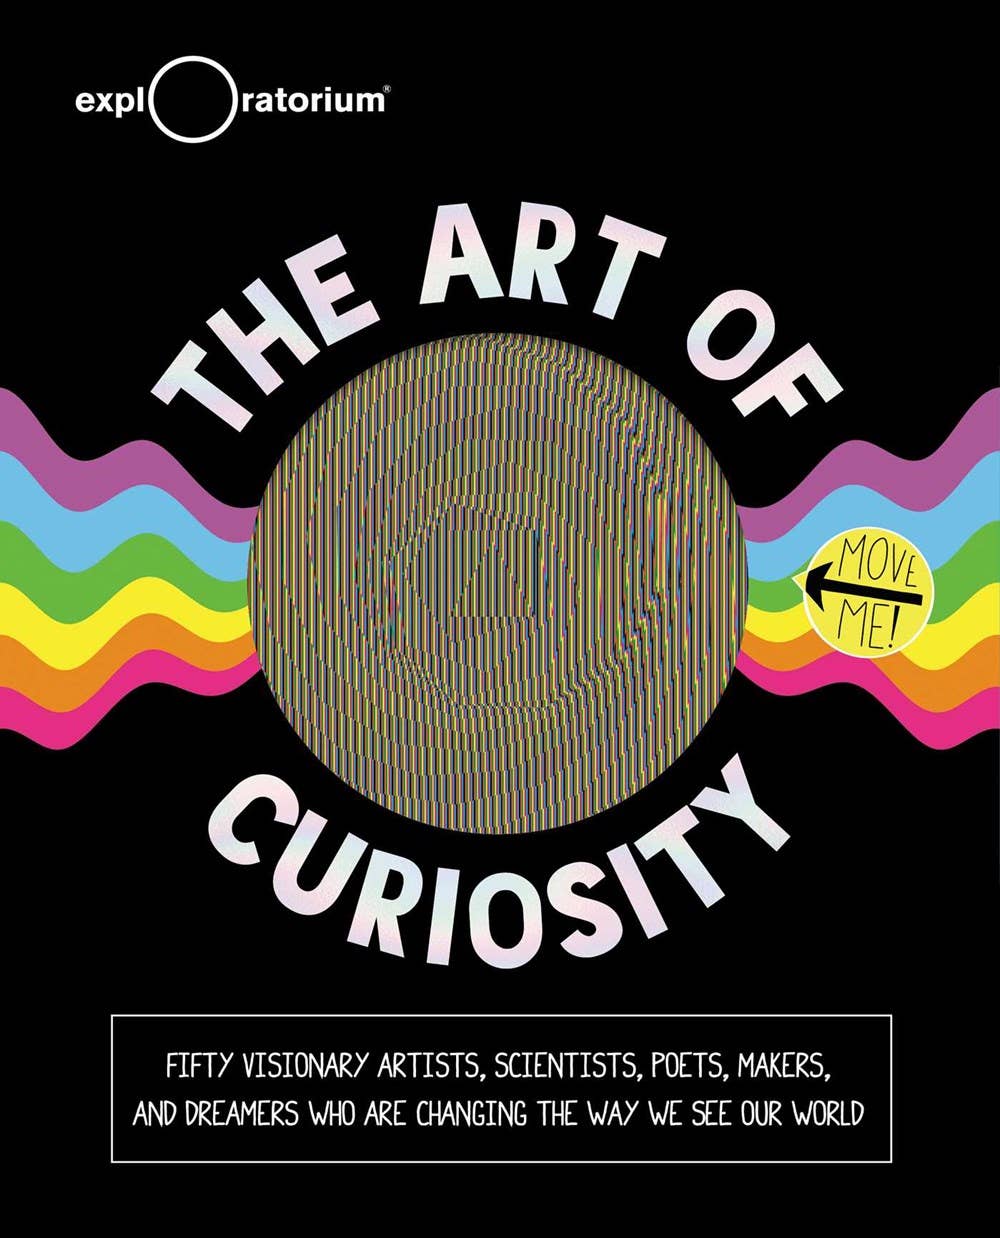 Art of Curiosity: 50 Visionary Artists, Scientists, Poets